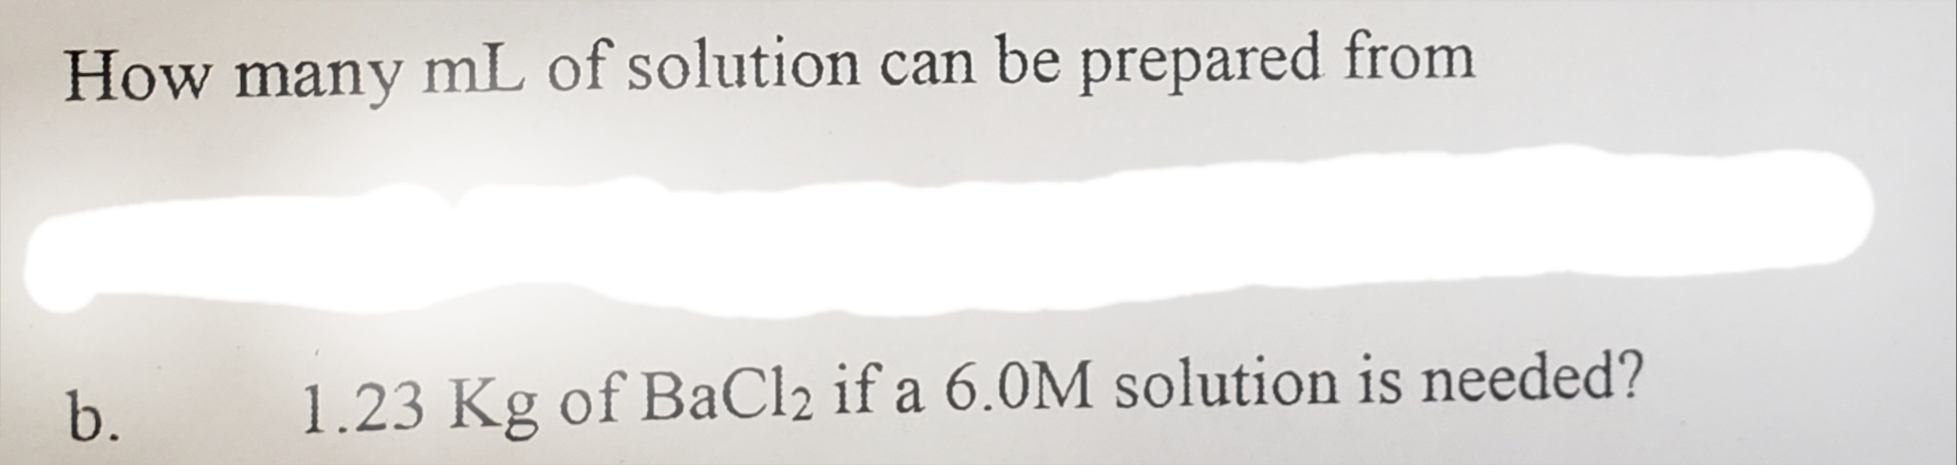 How many mL of solution can be prepared from
b. 1.23 Kg of BaCl2 if a 6.0M solution is needed?
